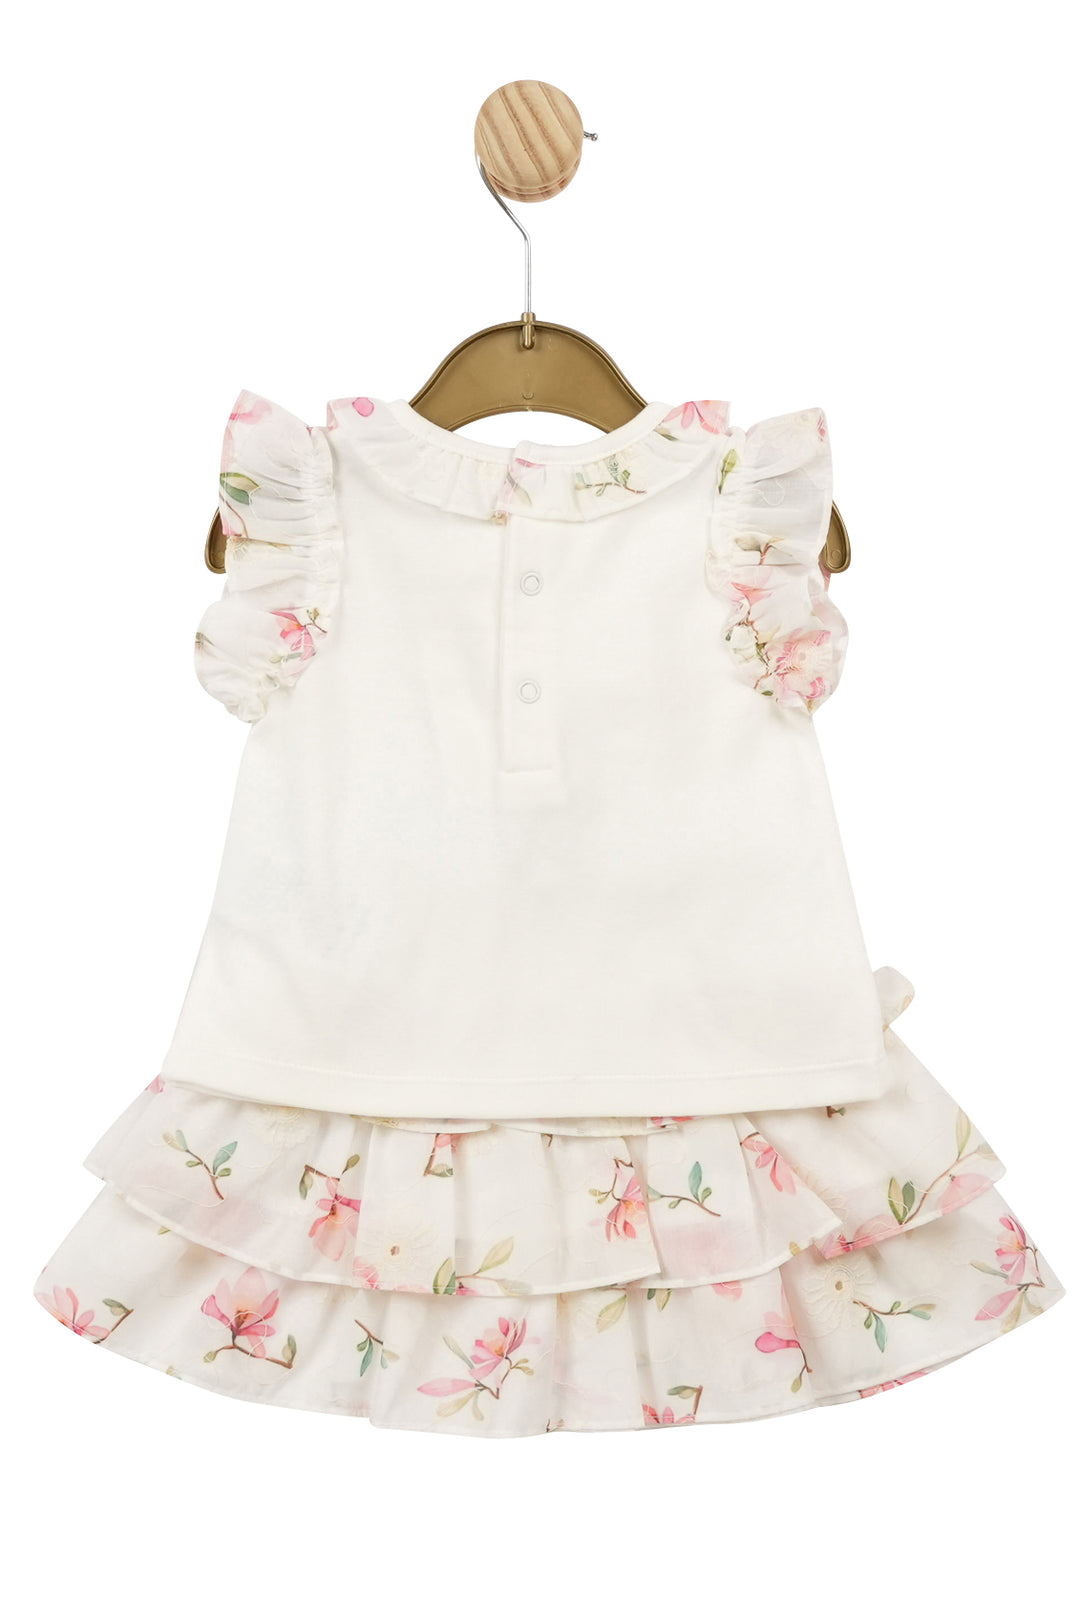 Mintini Baby "Violet" White & Pink Floral Top & Skirt | Millie and John